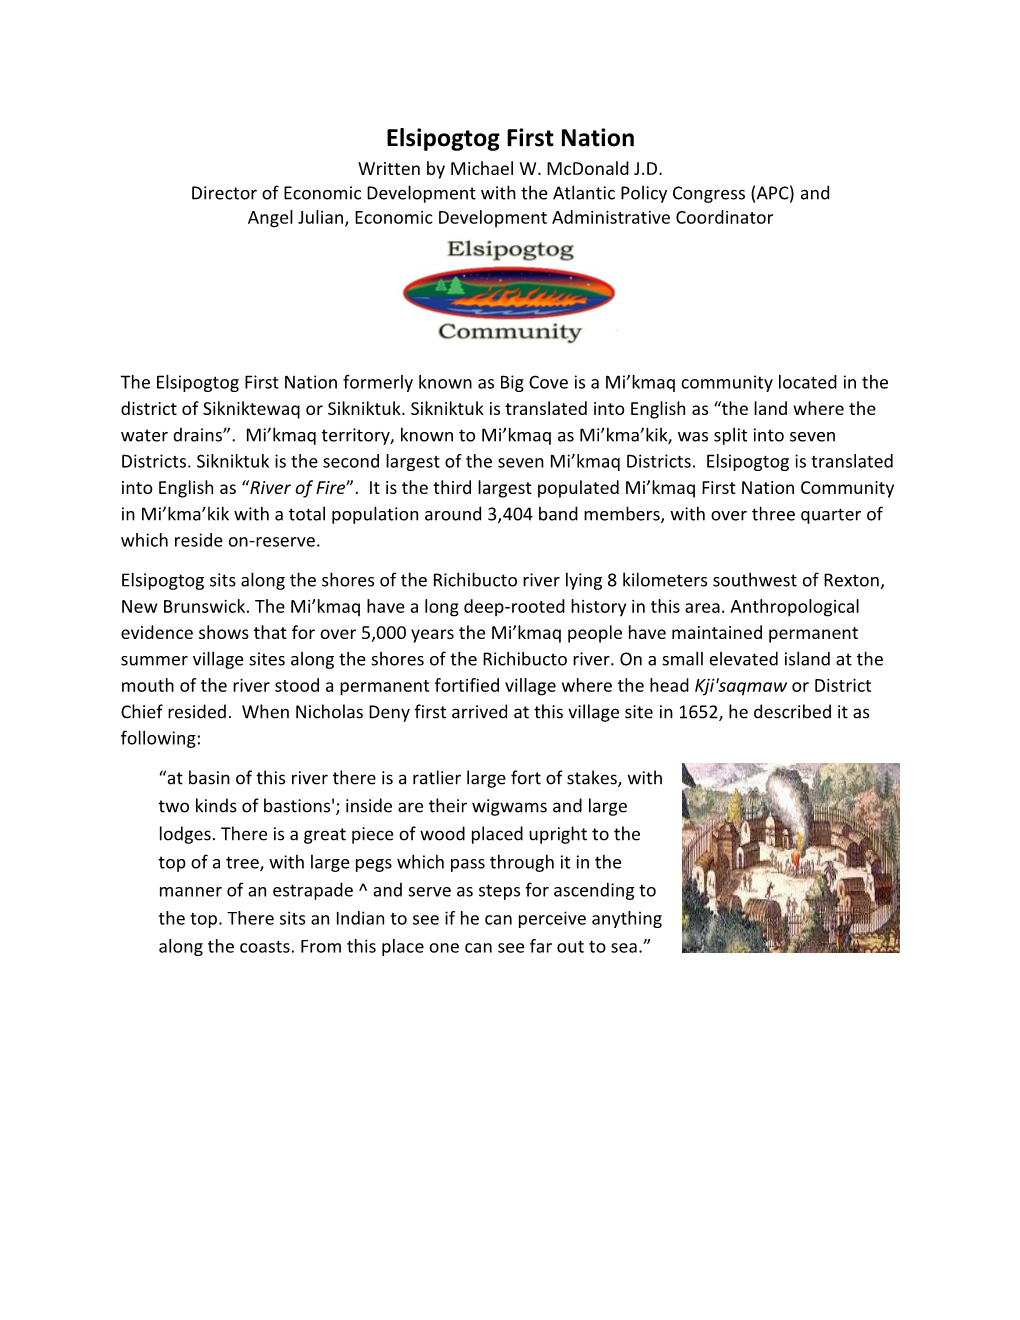 Elsipogtog First Nation Written by Michael W